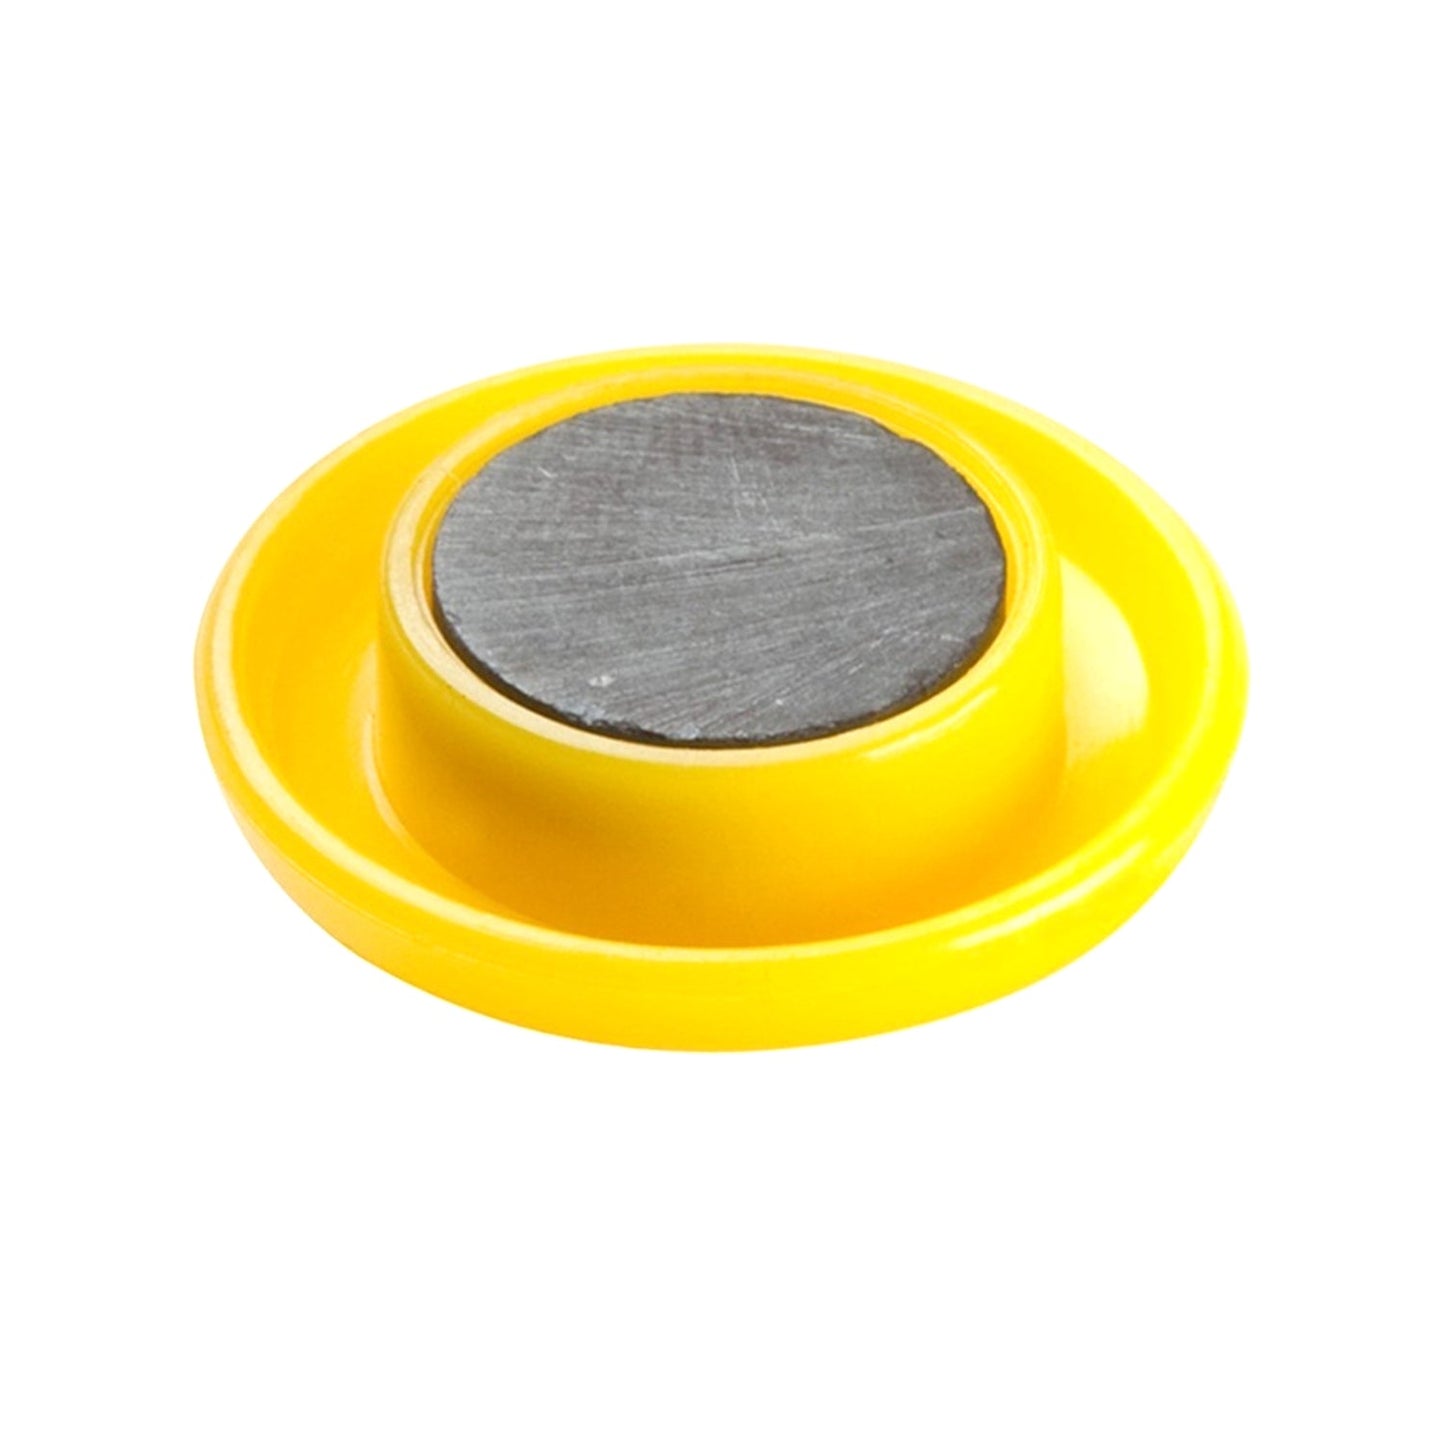 Colorful Board Magnets Circular Plastic Buttons